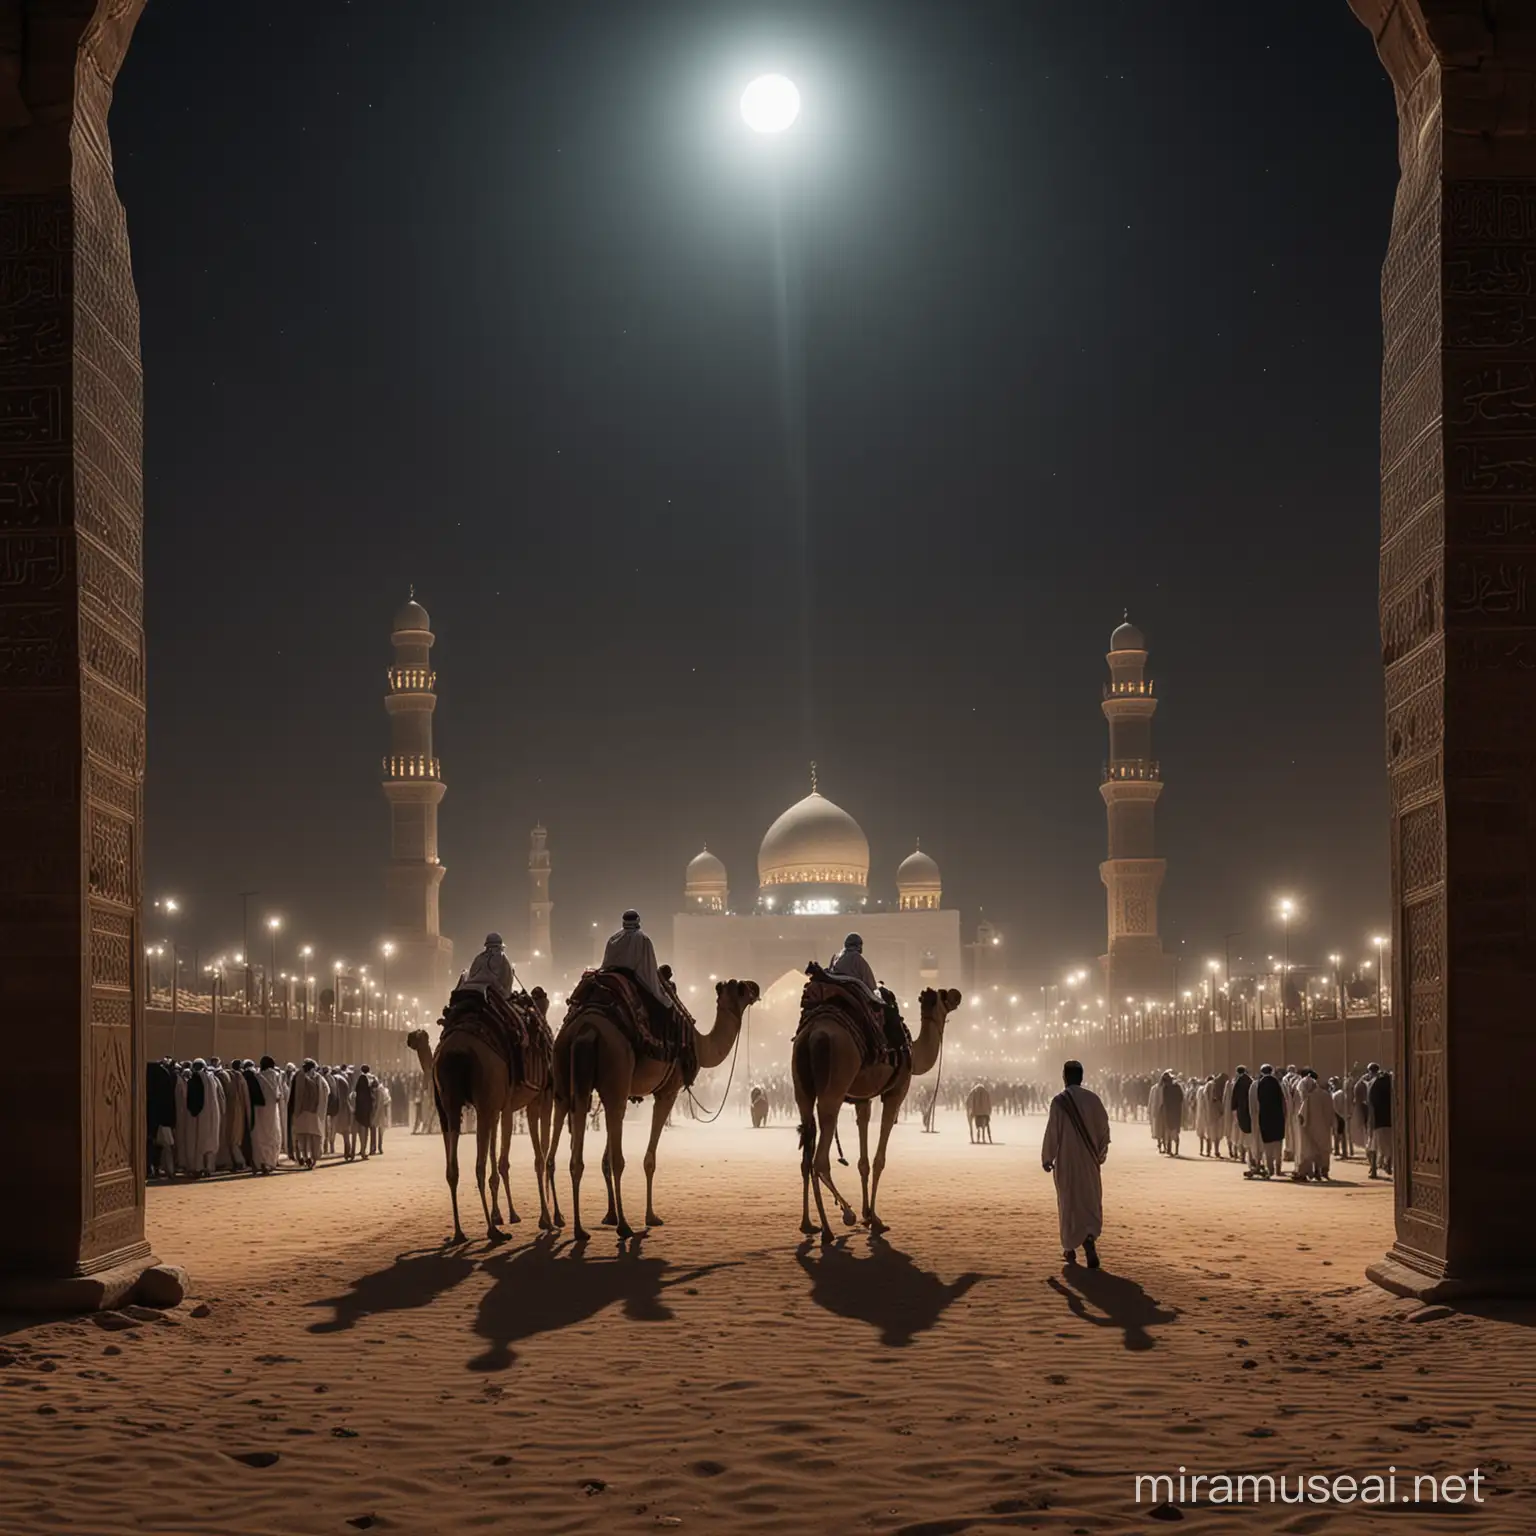 Moonlit Scene of Ancient Muslim Warrior Playing with Children near the Kaaba